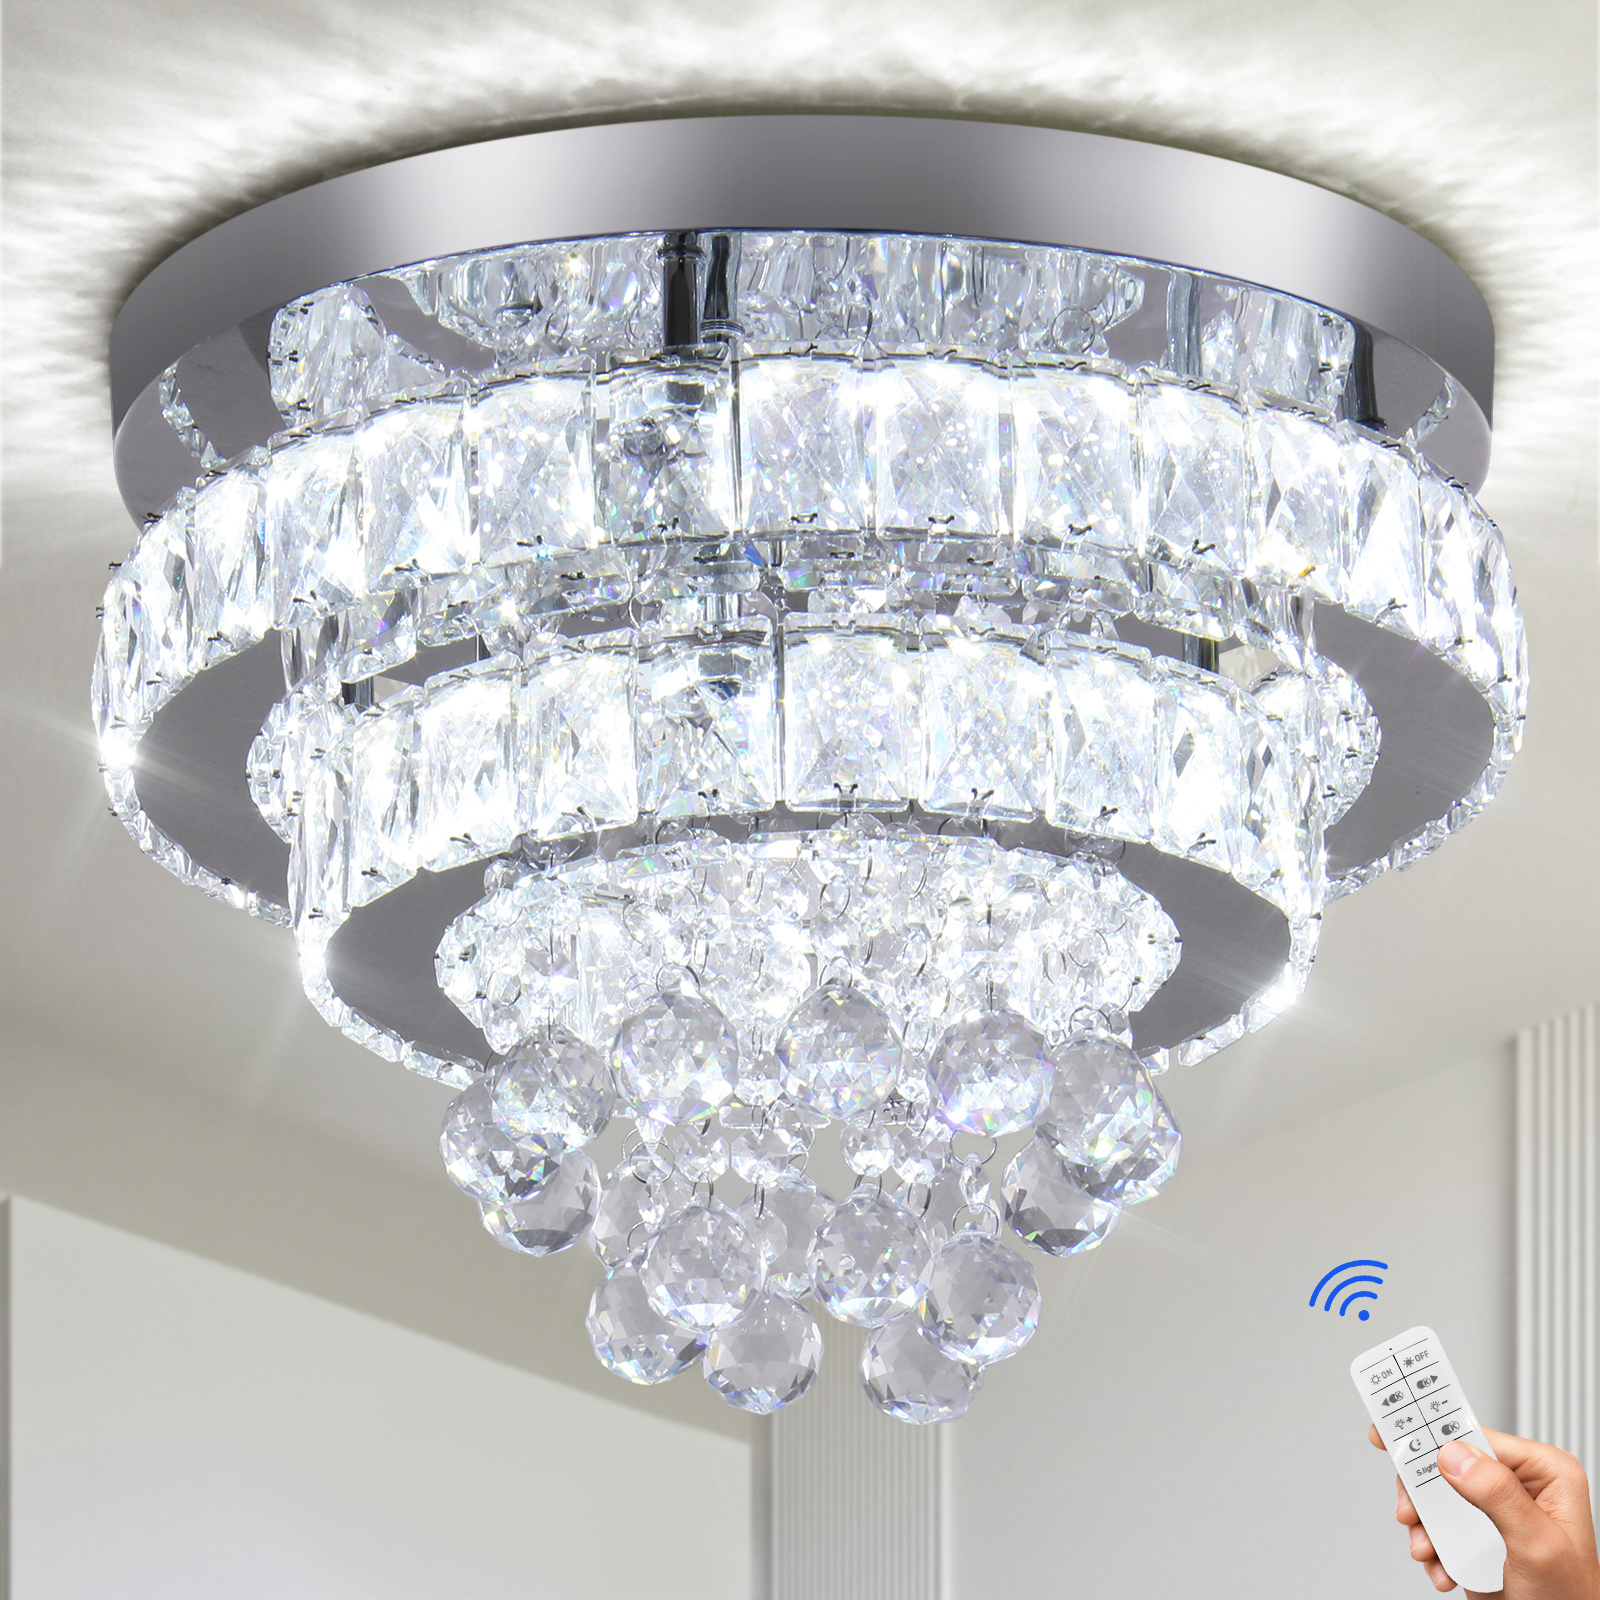 13.7" Crystal Chandeliers Round Modern Semi Flush Mount Ceiling Light Fixtures with Remote Chandelier for Bedroom Living Room, 2700K 4500K 6500K Dimmable